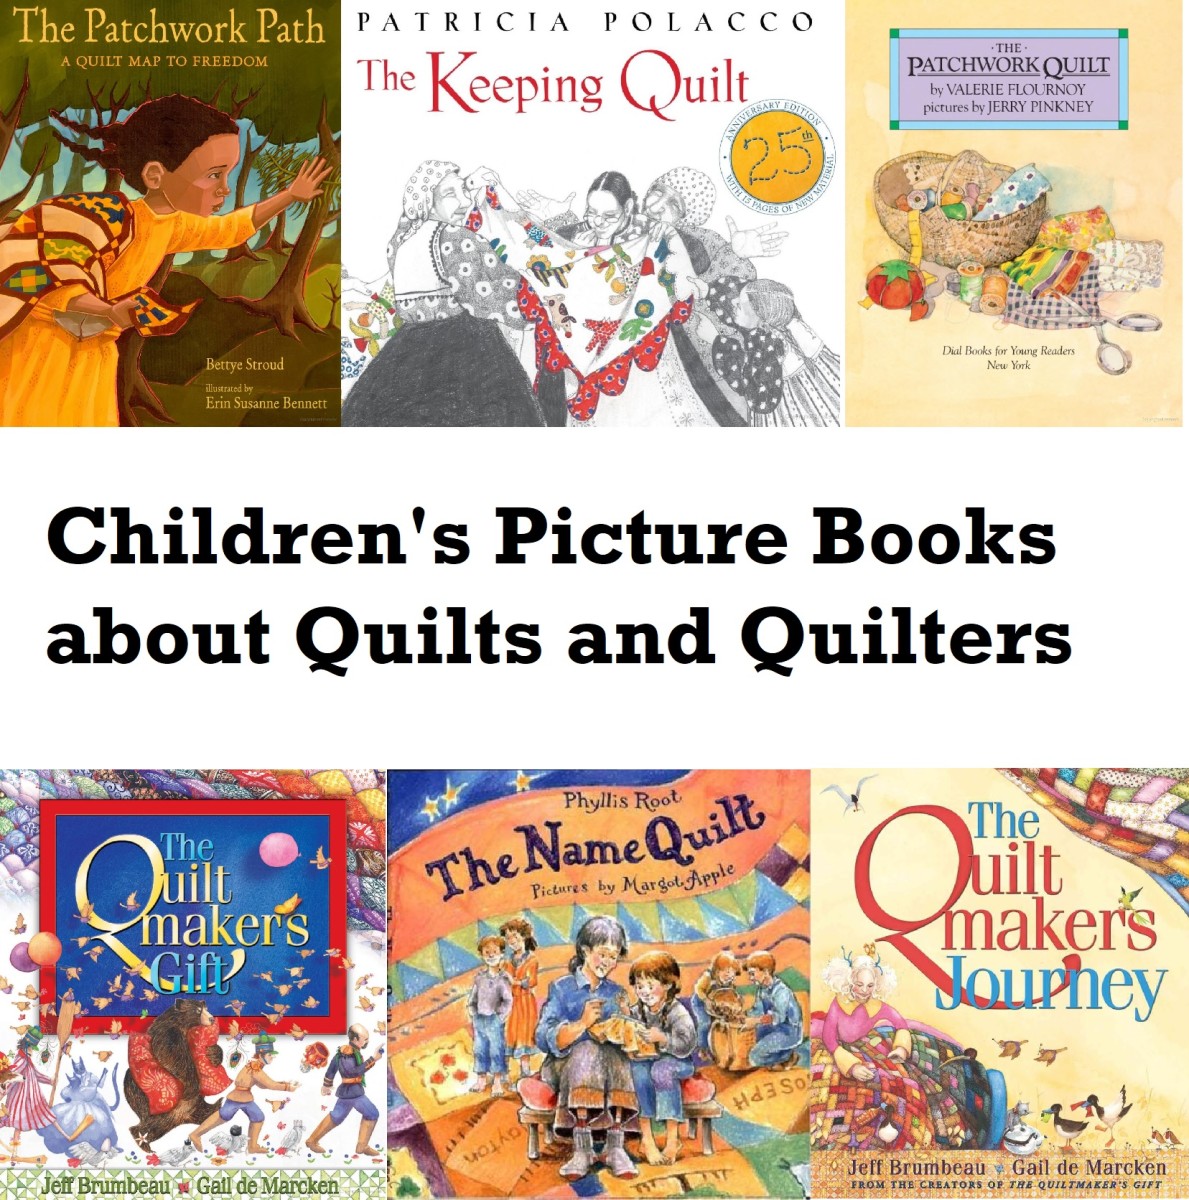 Children's Picture Books about Quilts and Quilters